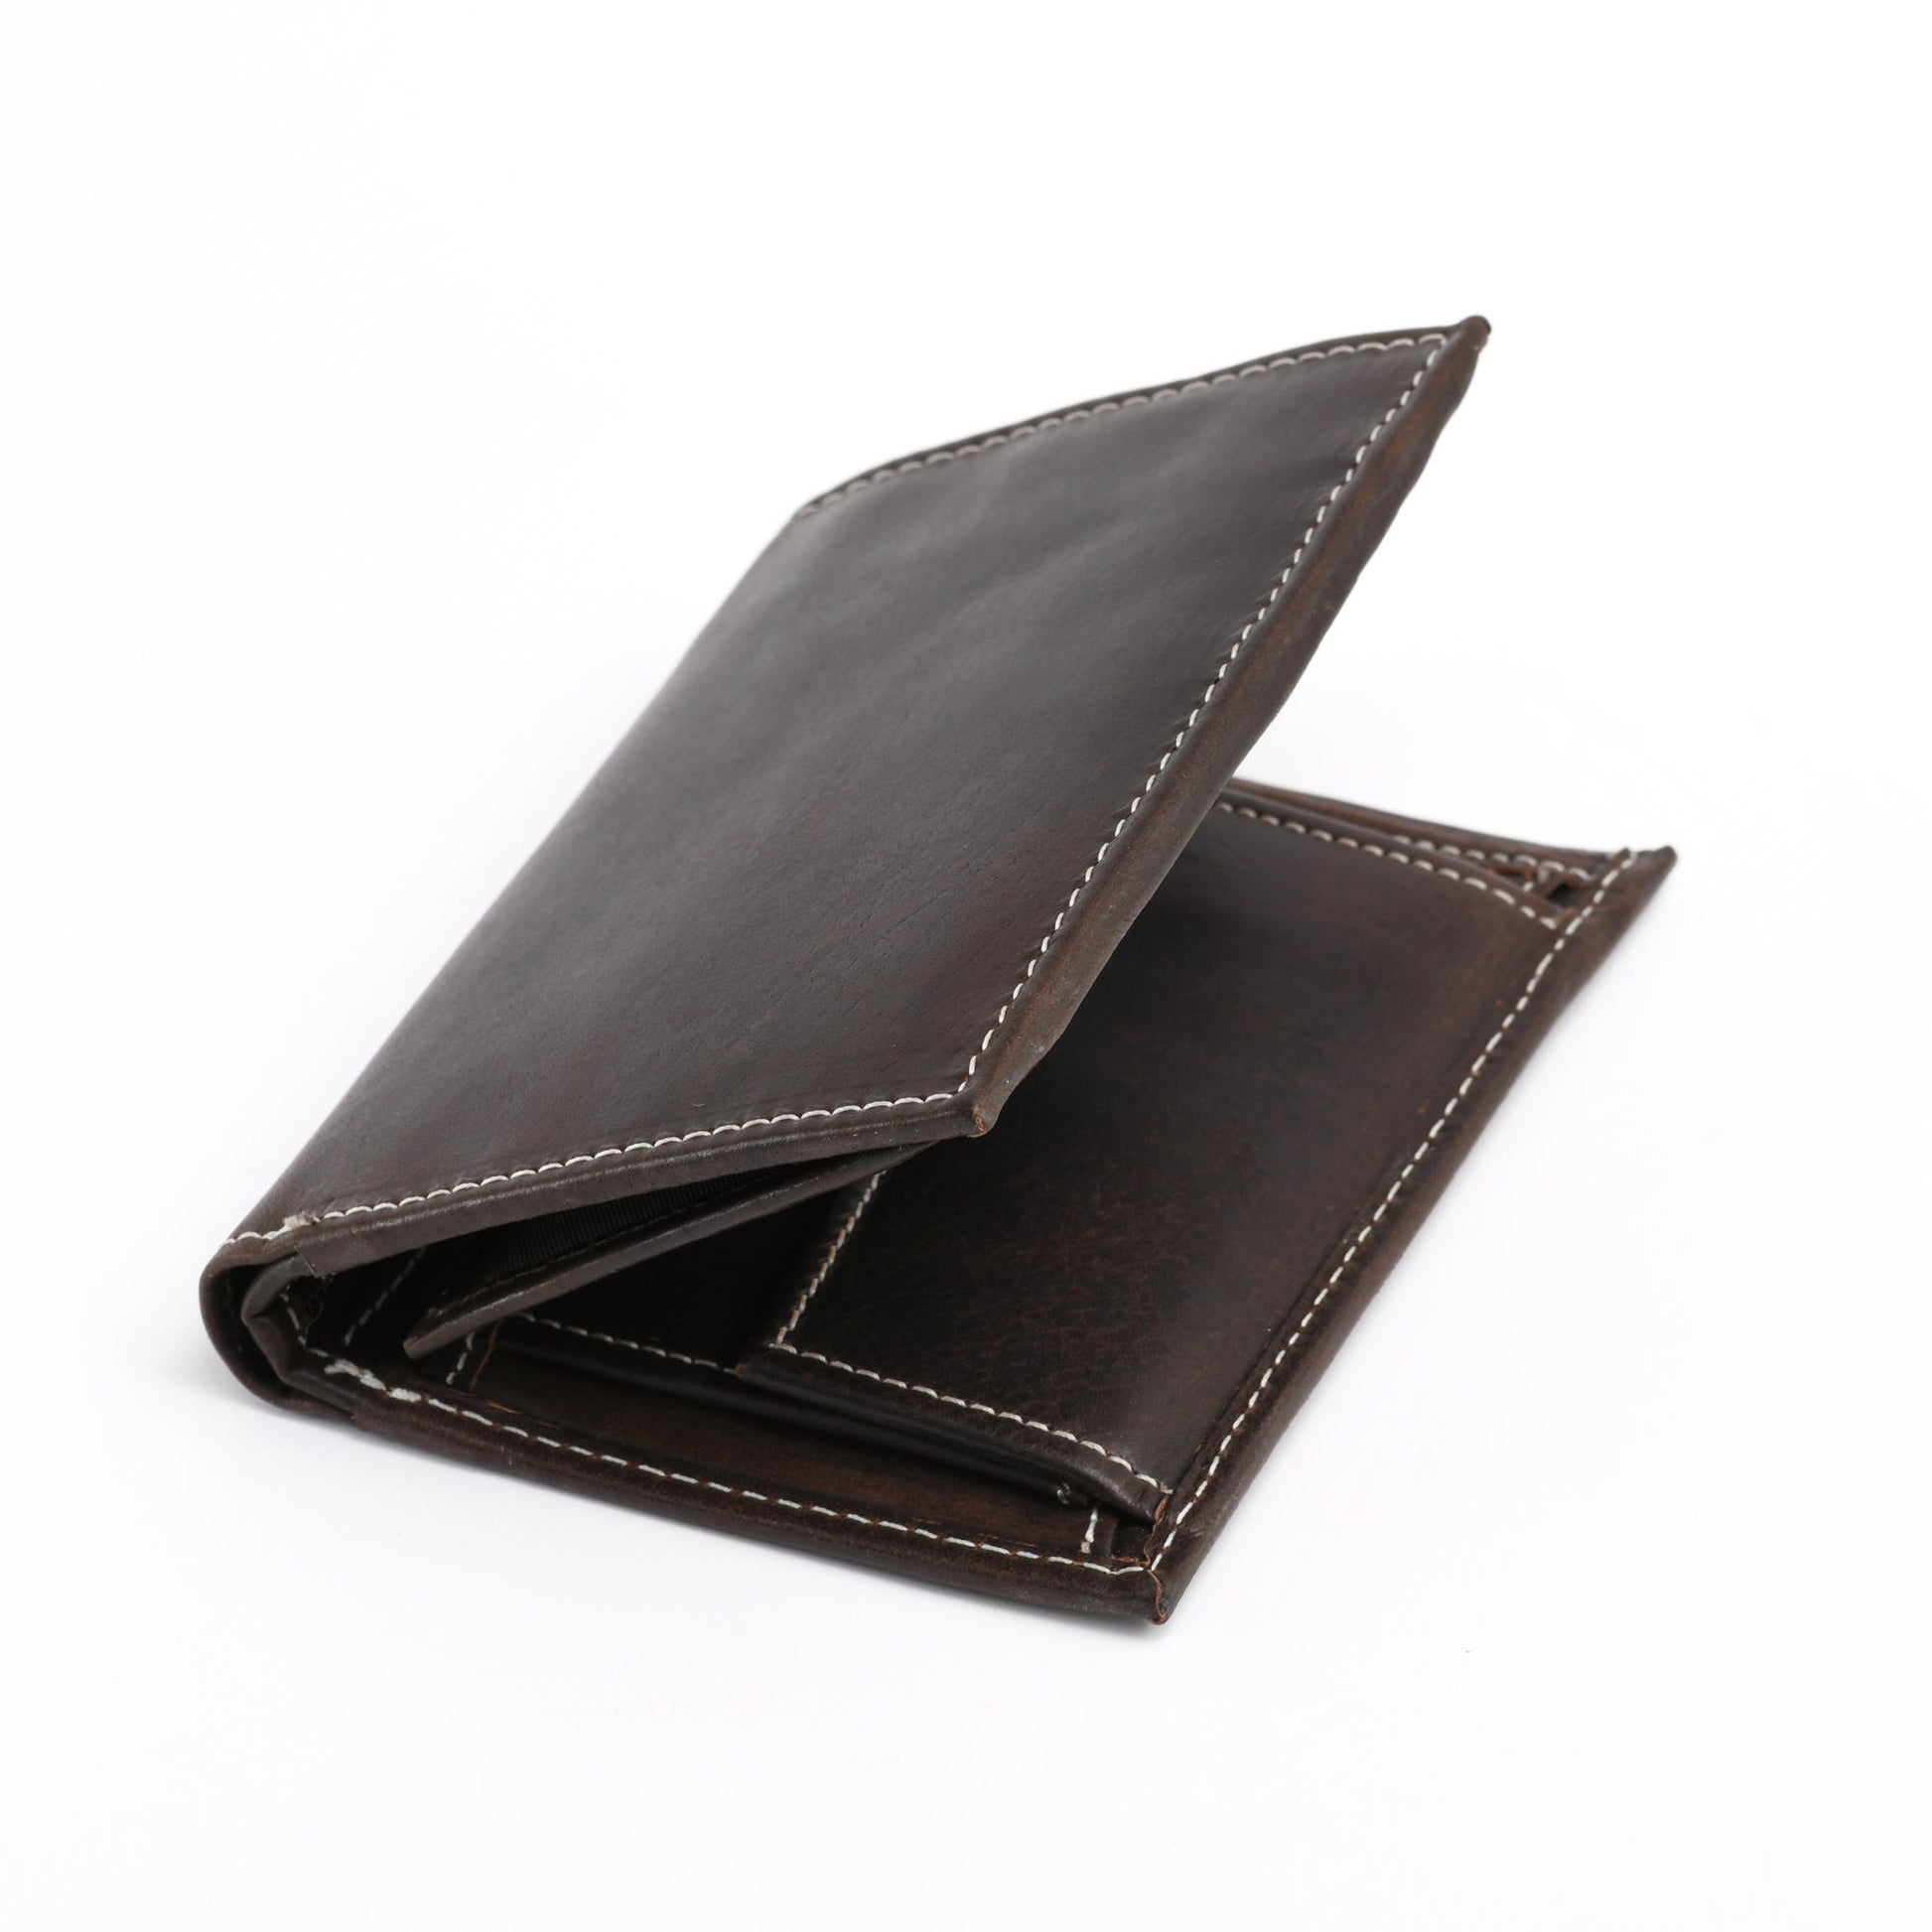 Style n Craft 391007 Bifold Hipster Leather Wallet with Inside Center Zipper, Left Flap & Coin Pocket in Dark Brown Color - Closed Angled View Front